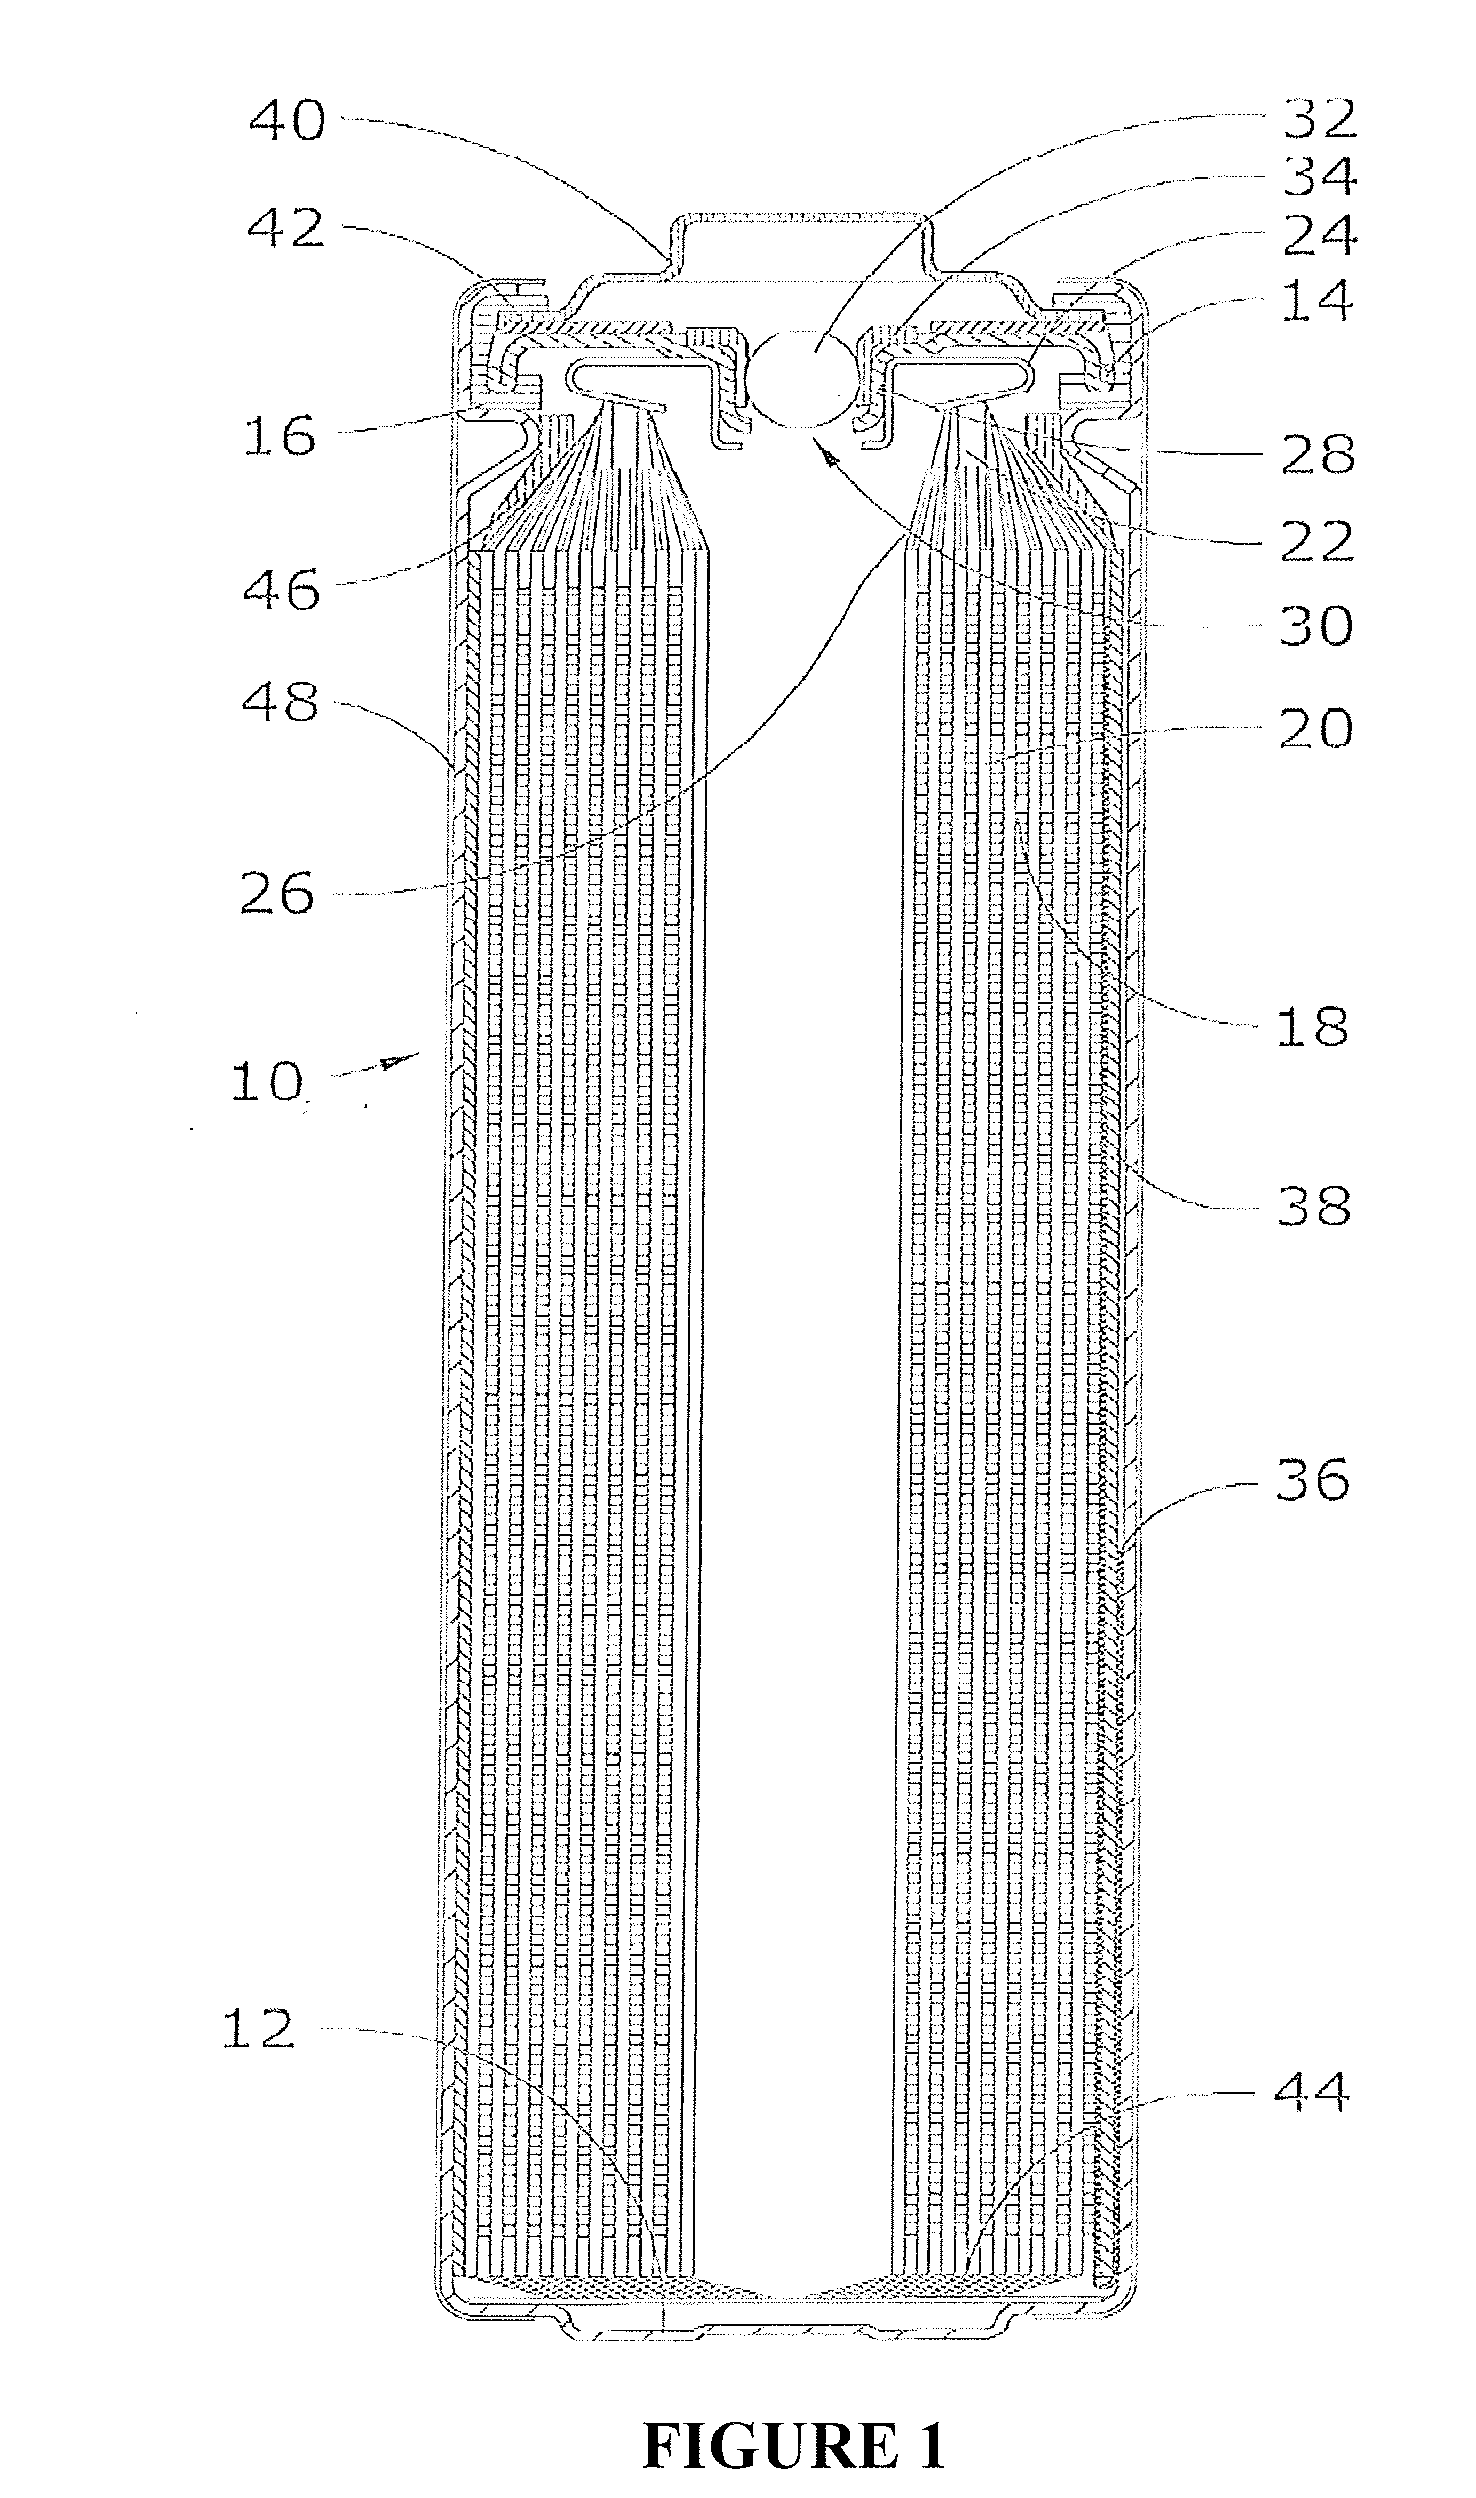 Lithium-Iron Disulfide Cell Design with Core Reinforcement